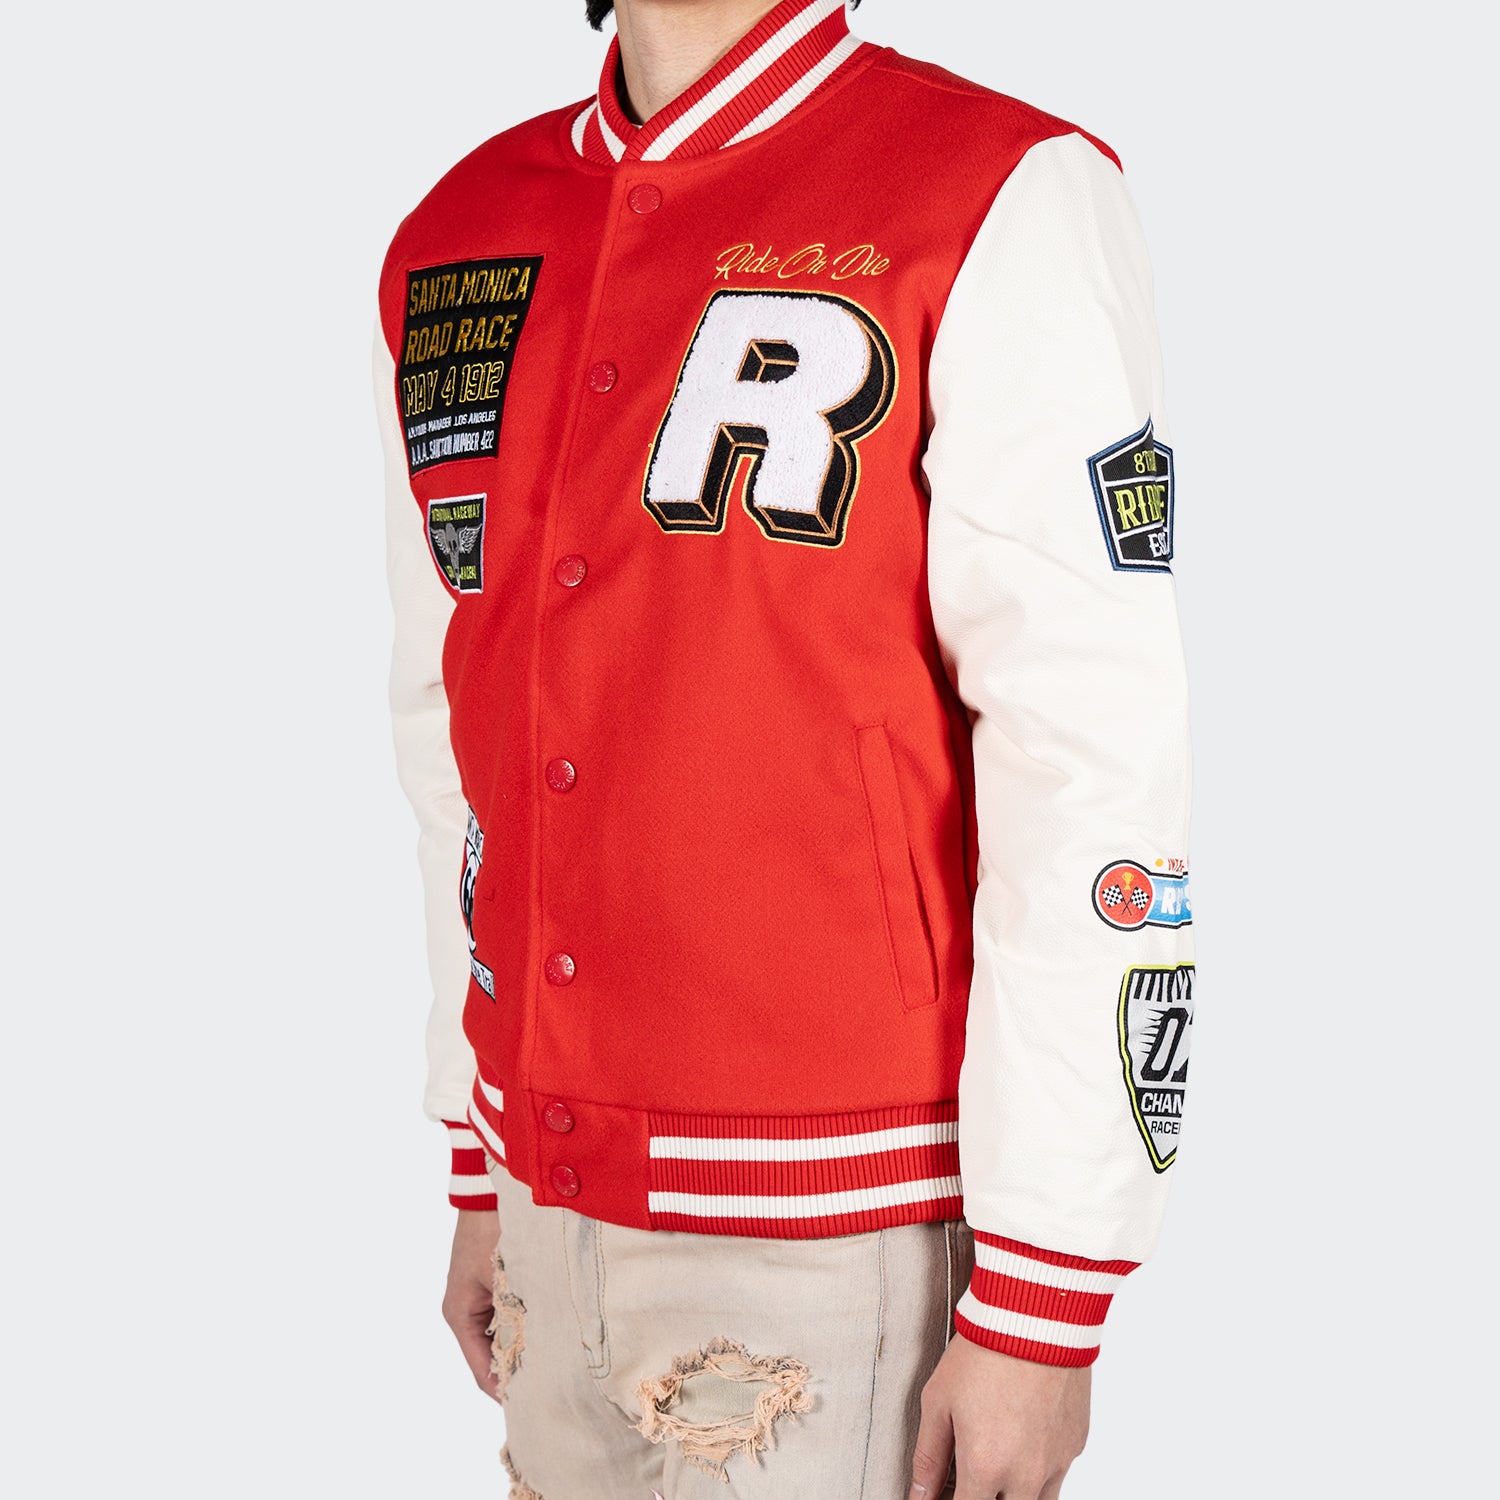 TMTY Ride or Die Road Race Varsity Jacket Red | Chicago City Sports